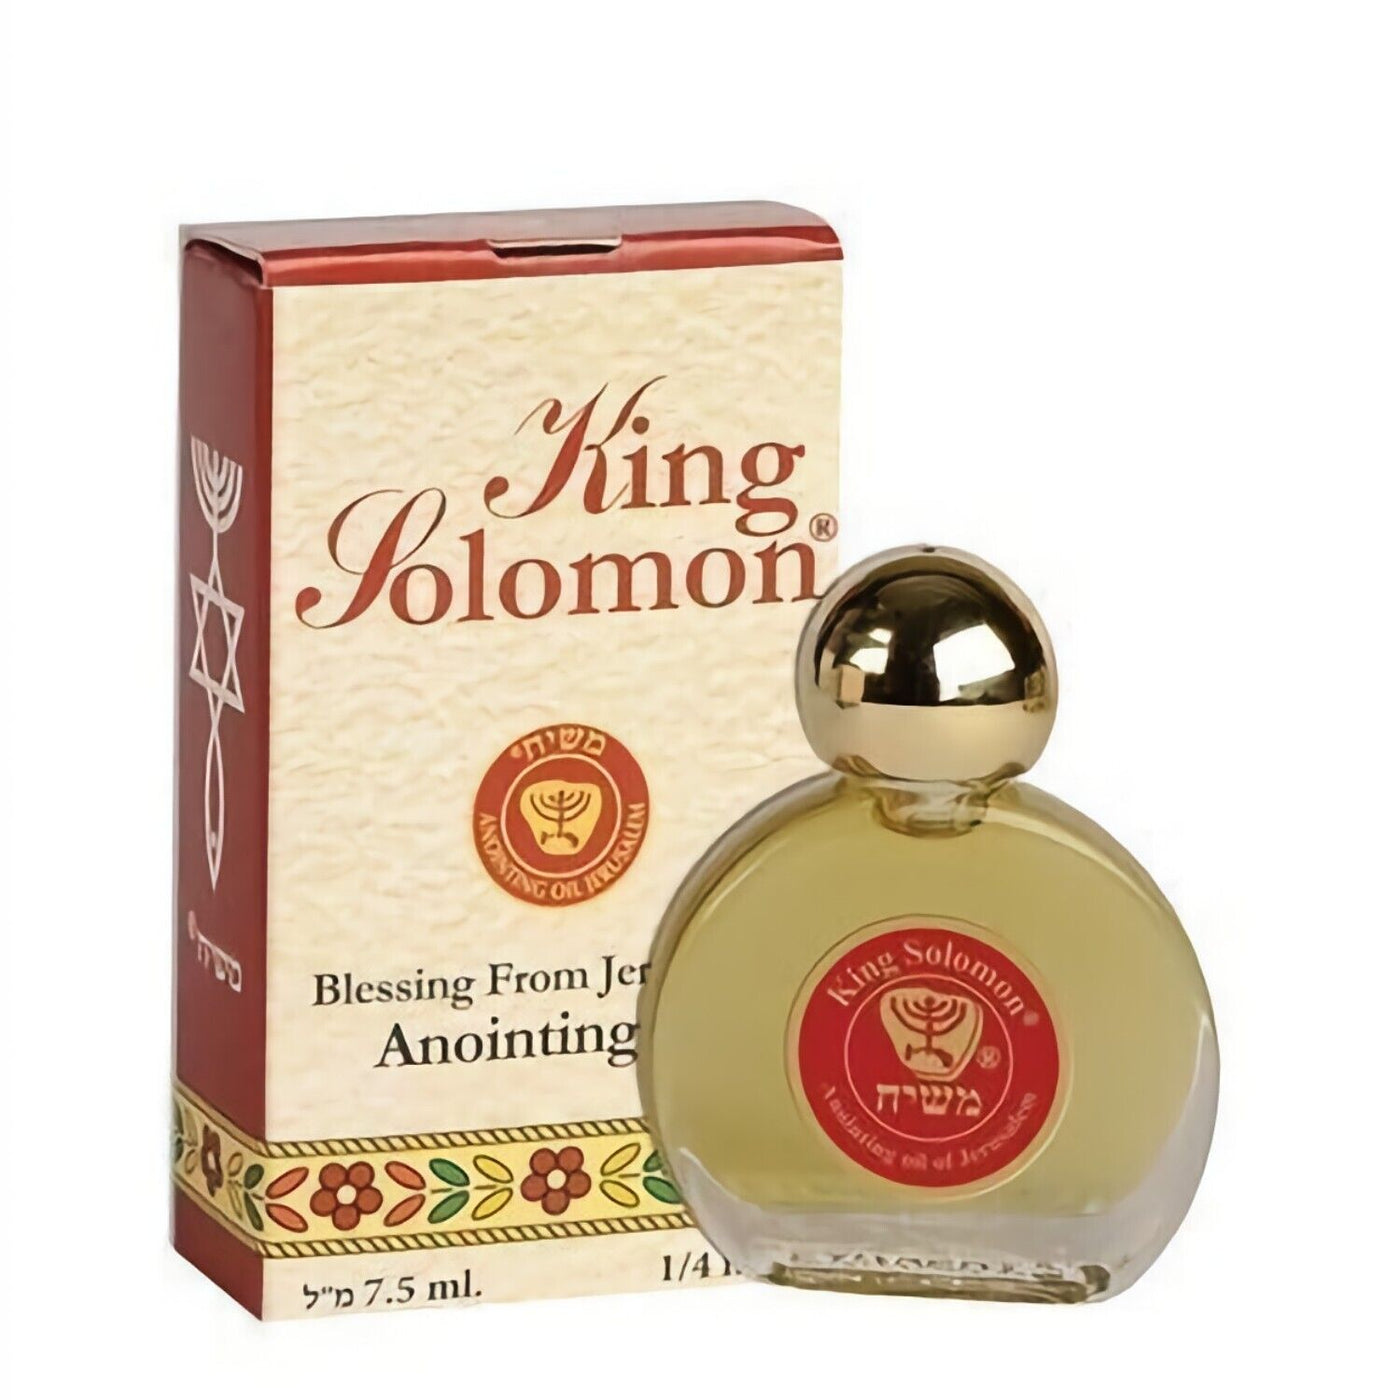 Anointing Oil - King Solomon 7.5 ml - 0.25 fl.oz from the Holyland